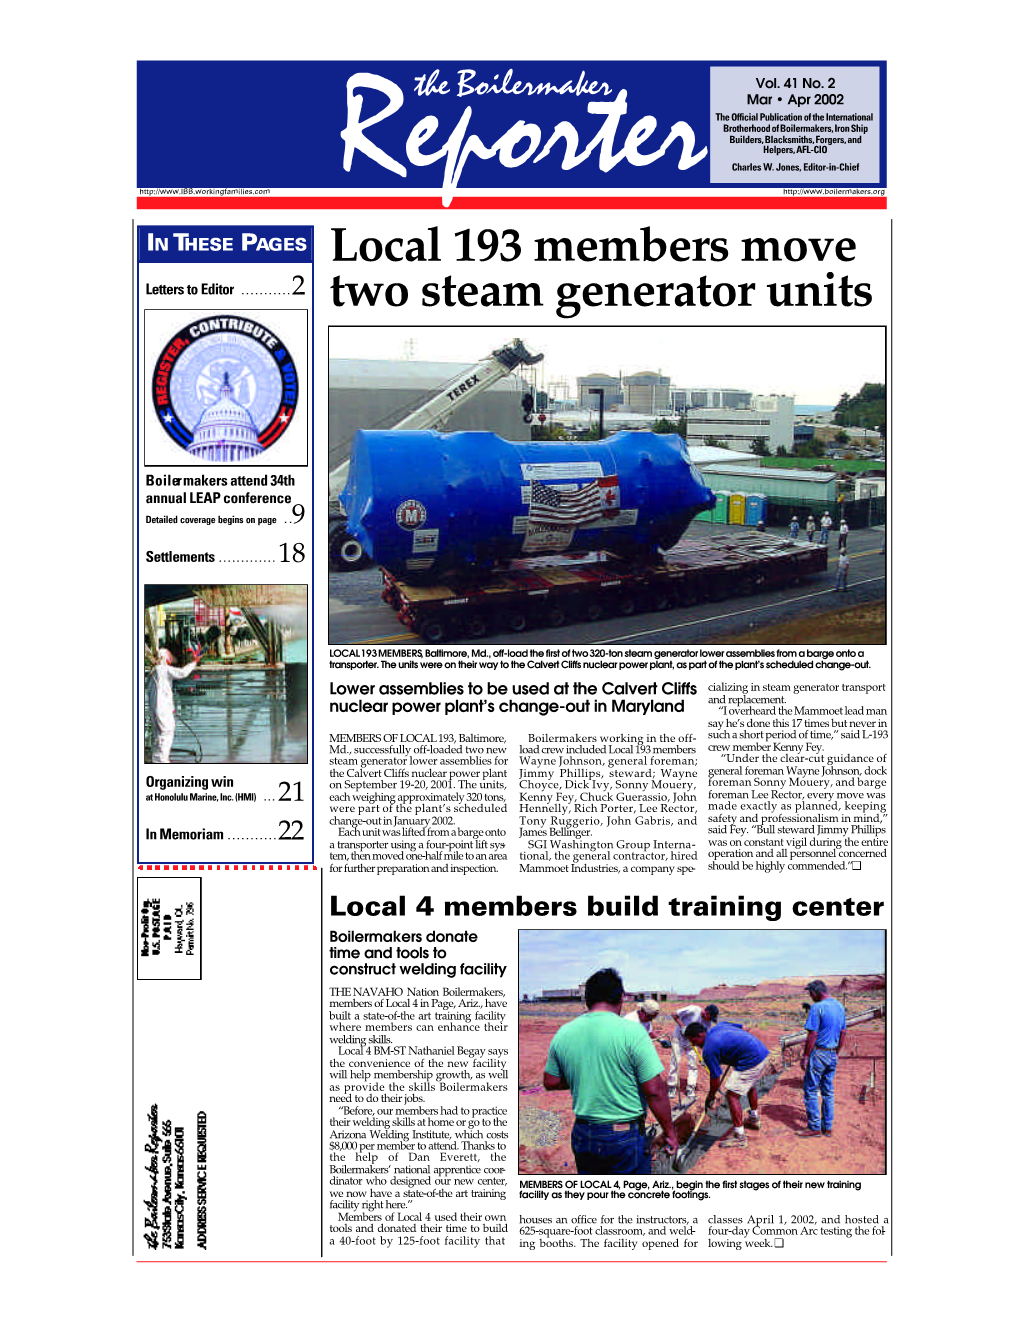 Local 193 Members Move Two Steam Generator Units